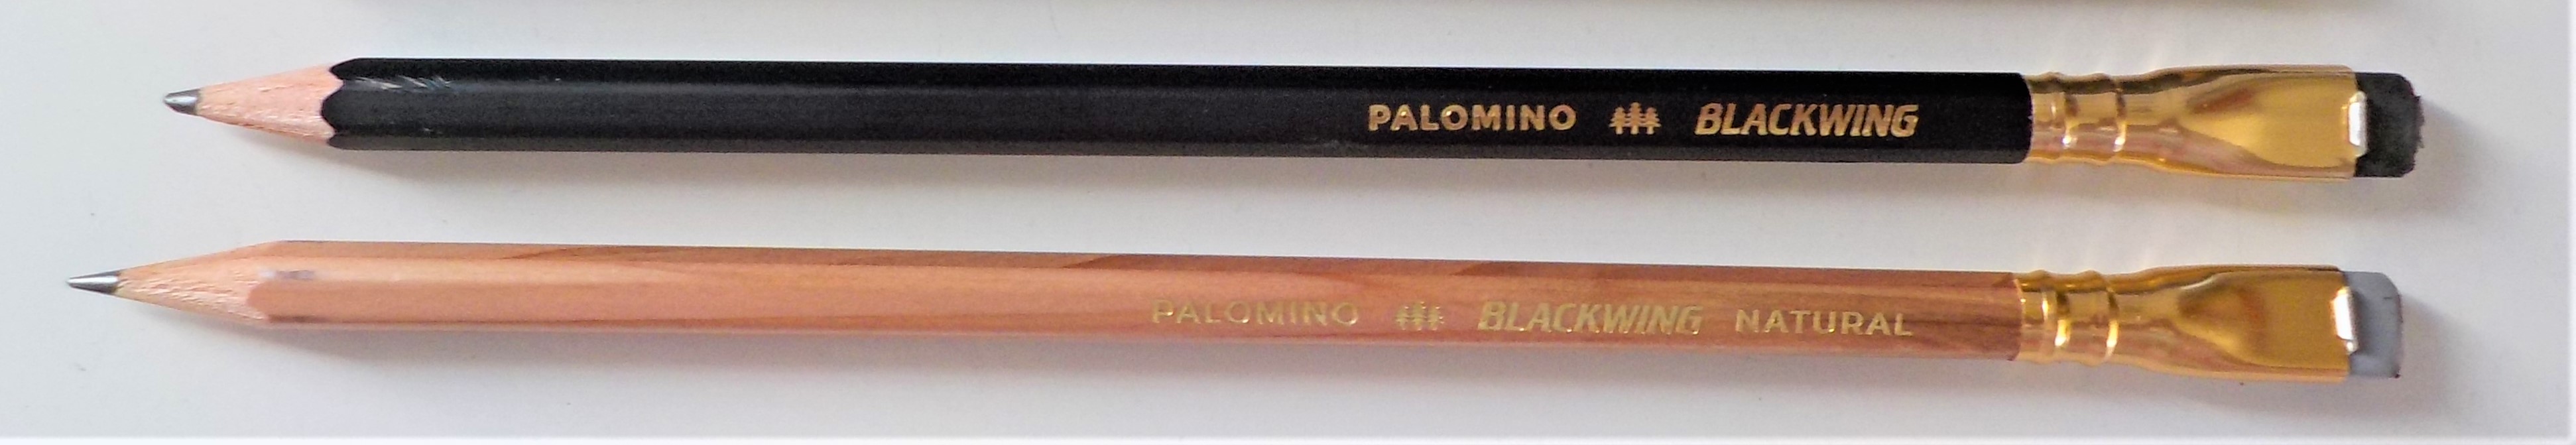 Blackwing Natural Extra Firm Pencil Review — The Pen Addict